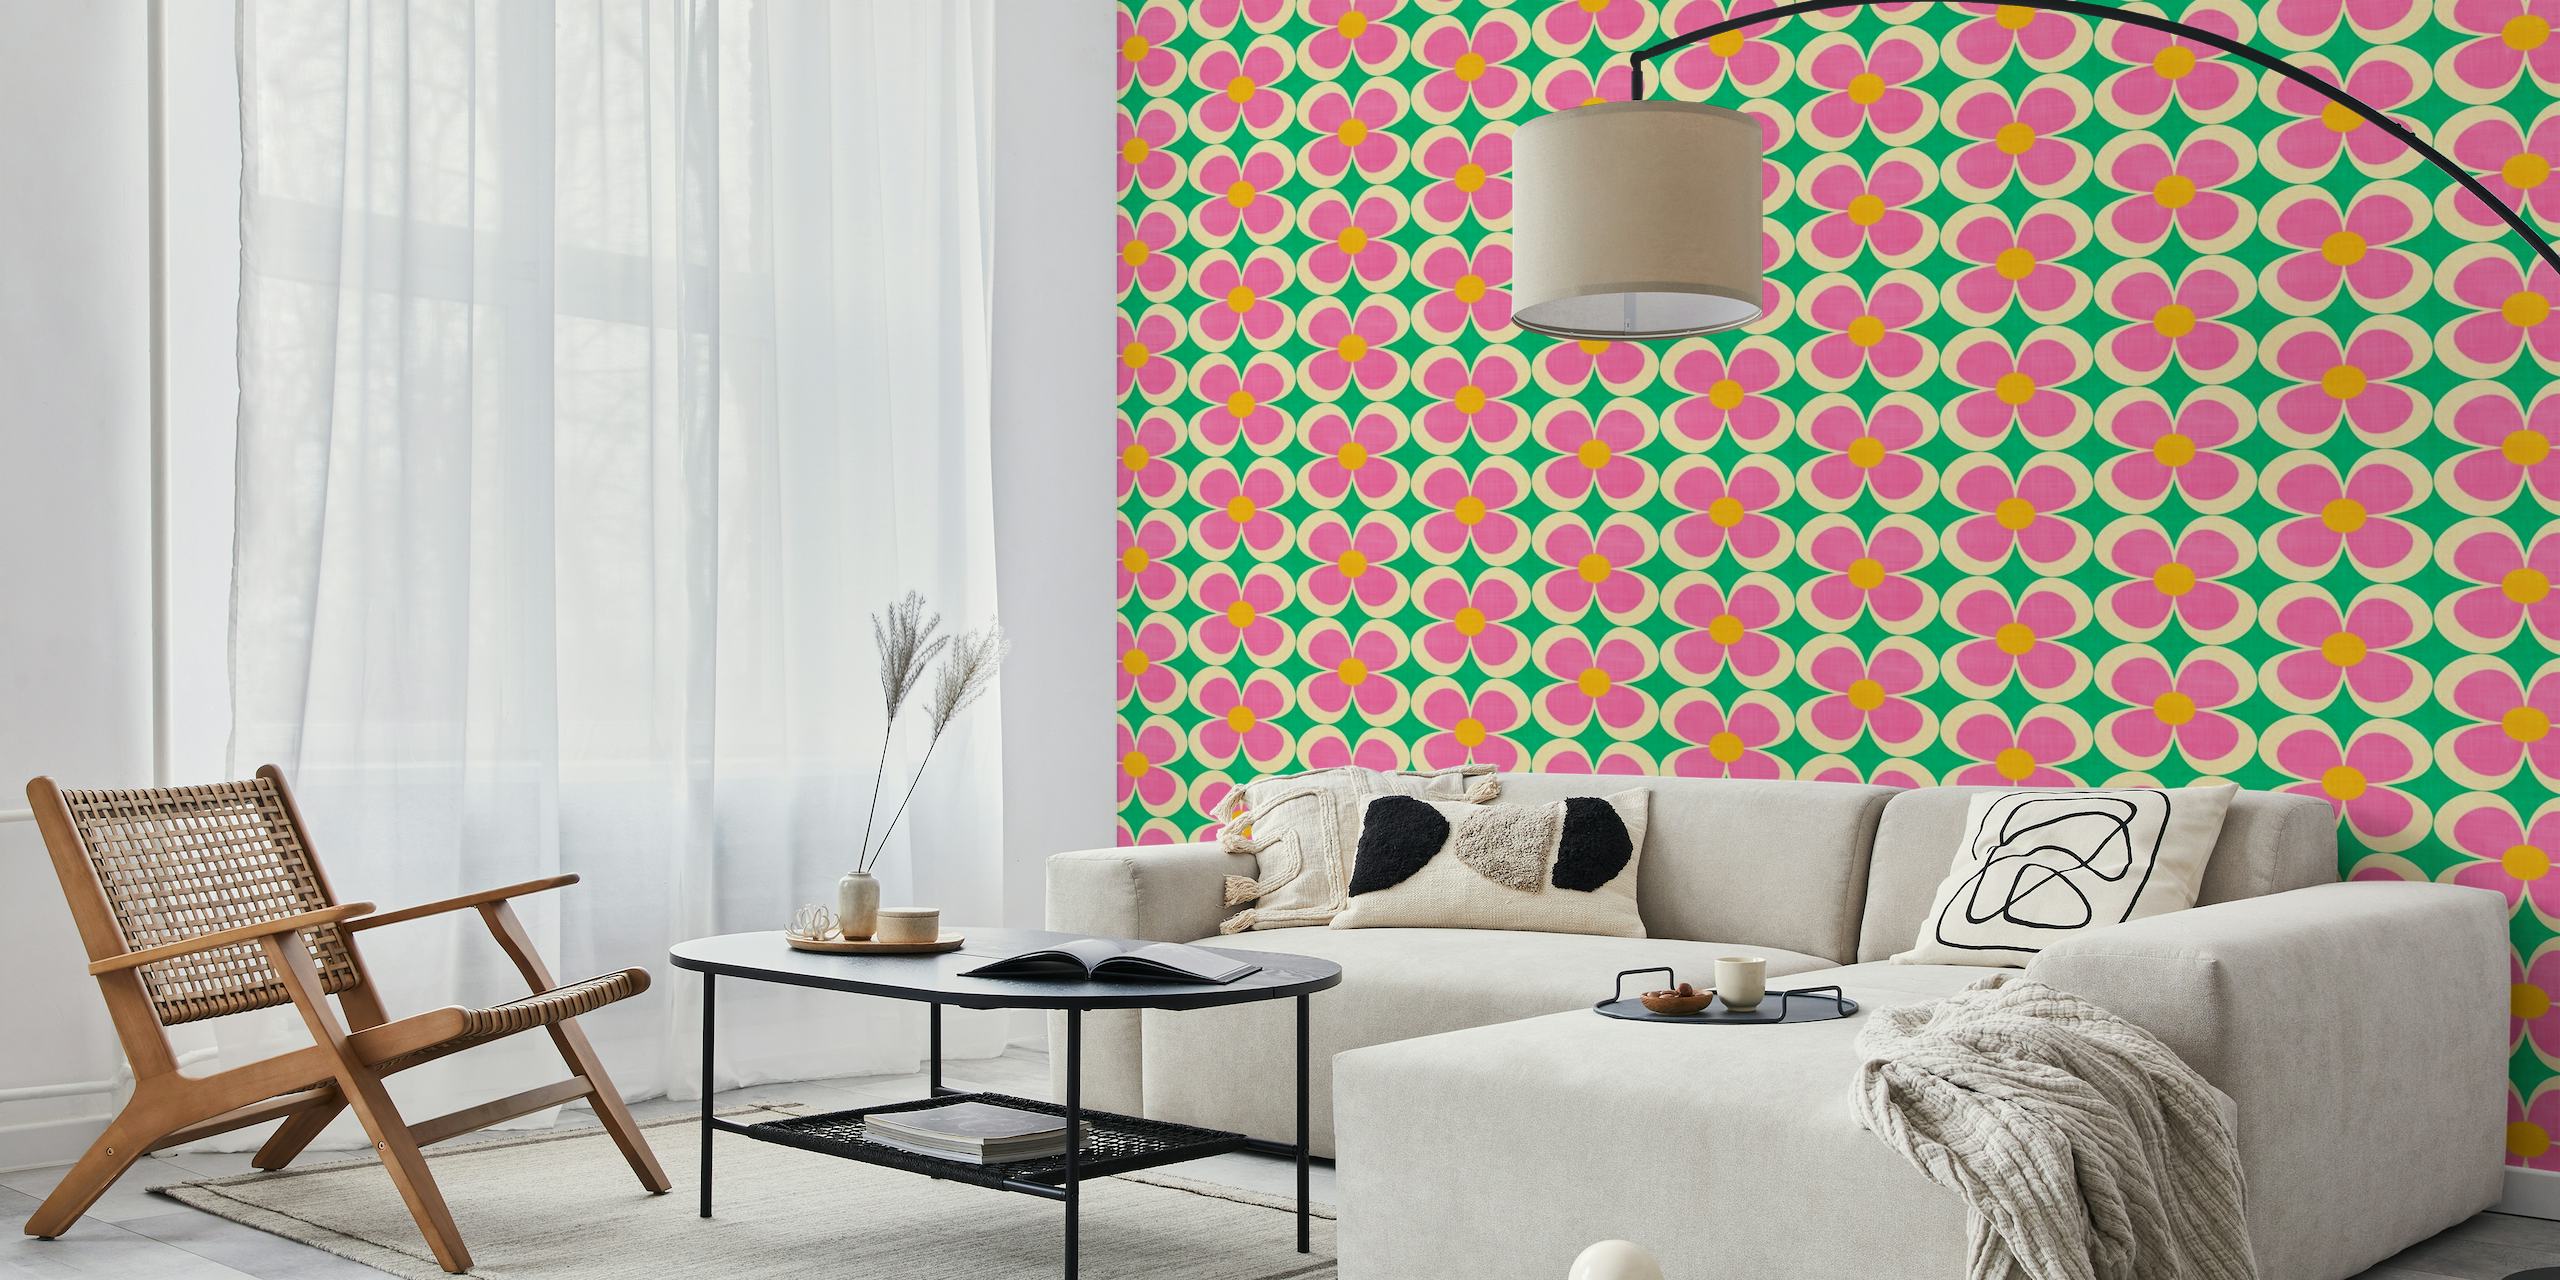 Groovy Geometric Floral Pink and Green Small papel de parede